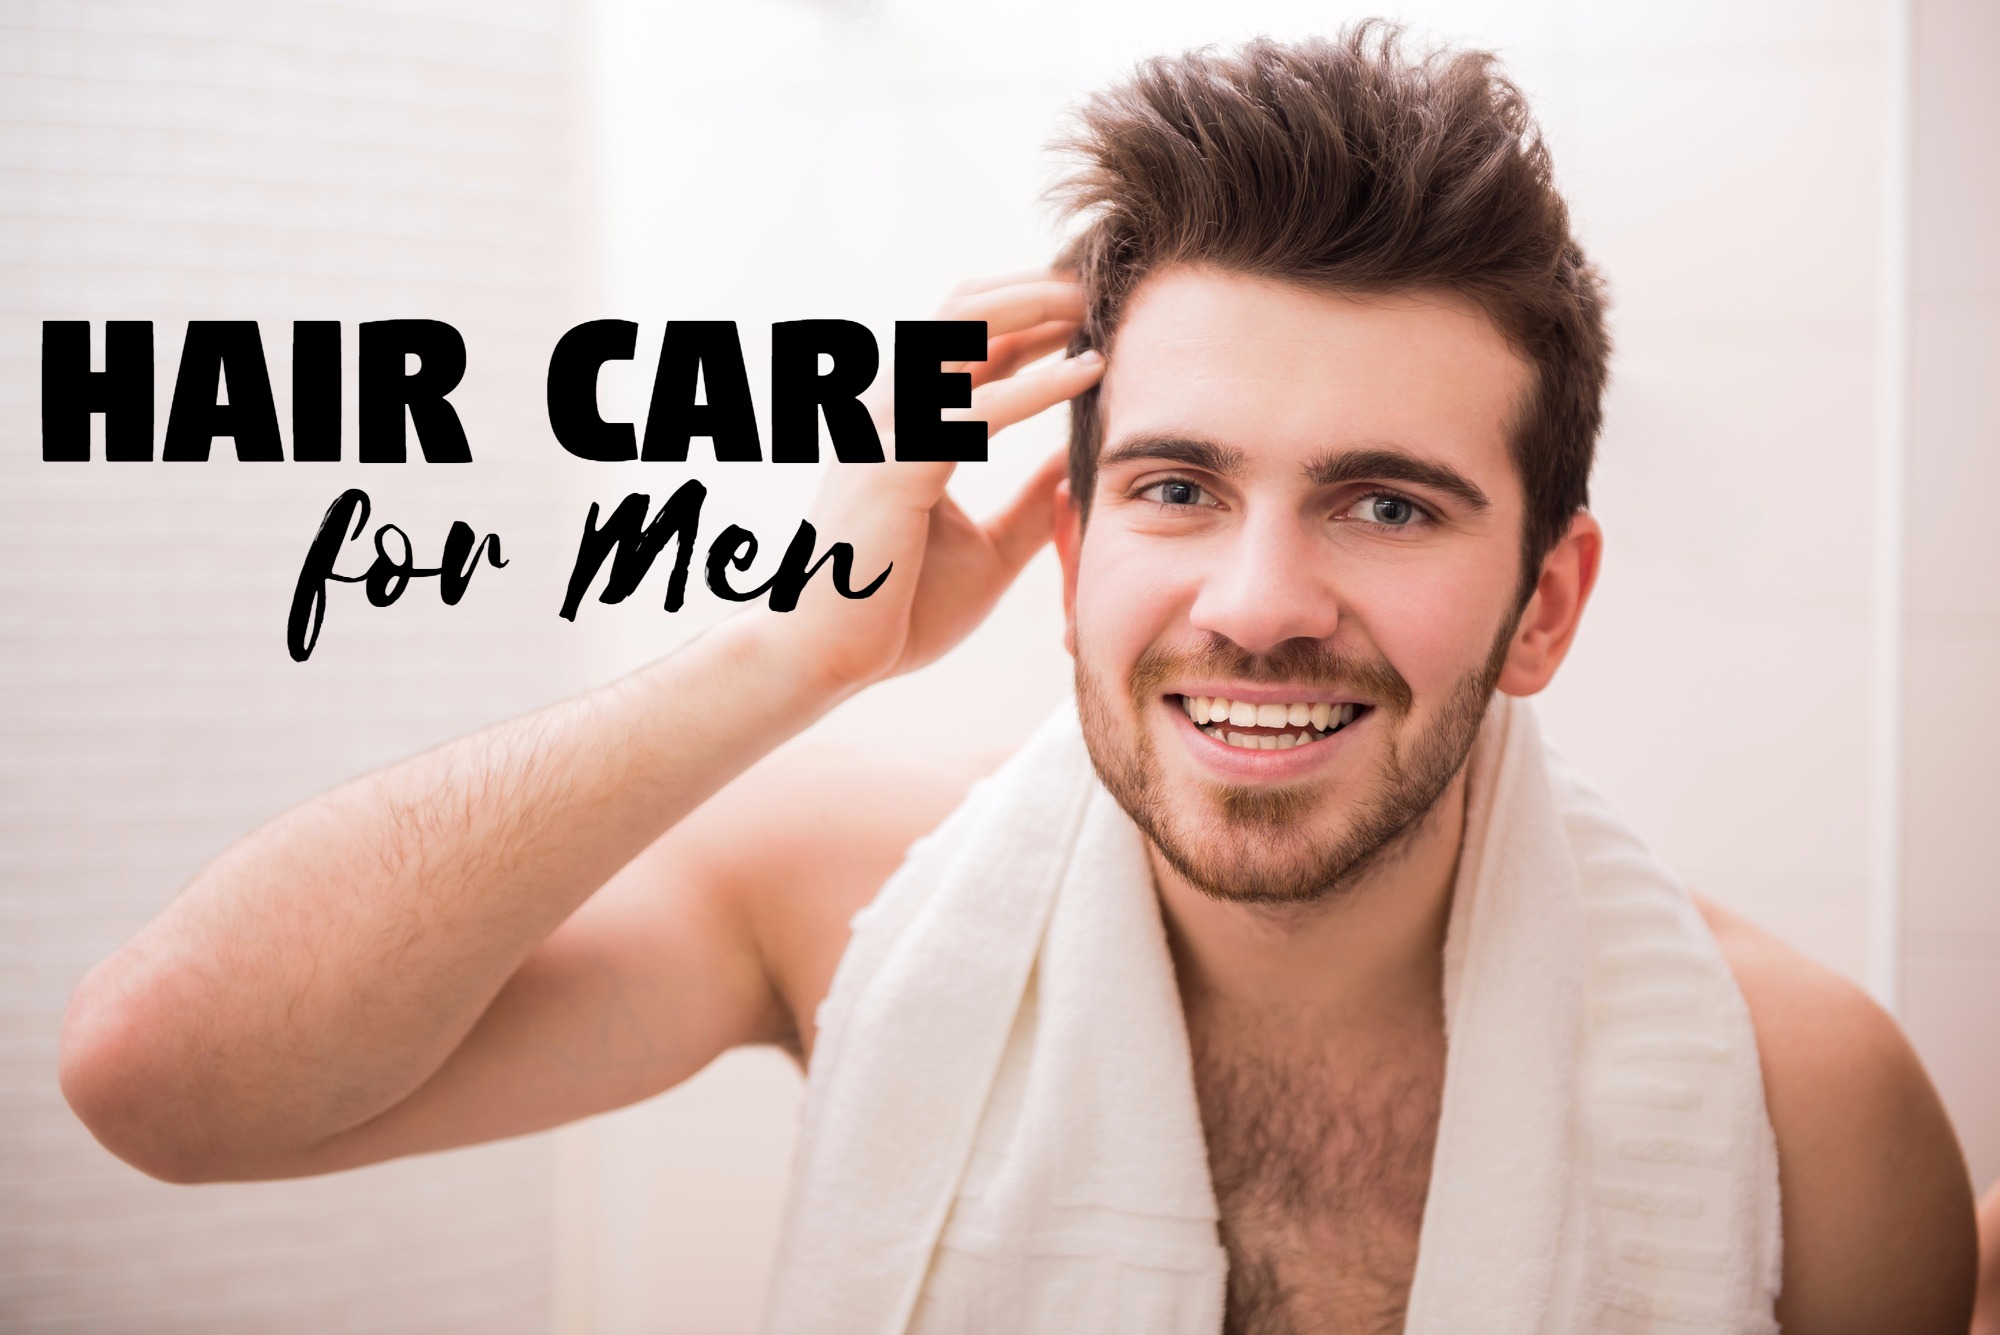 Father's Day Gift Ideas: Hair Care Products for Men - My Hair Care